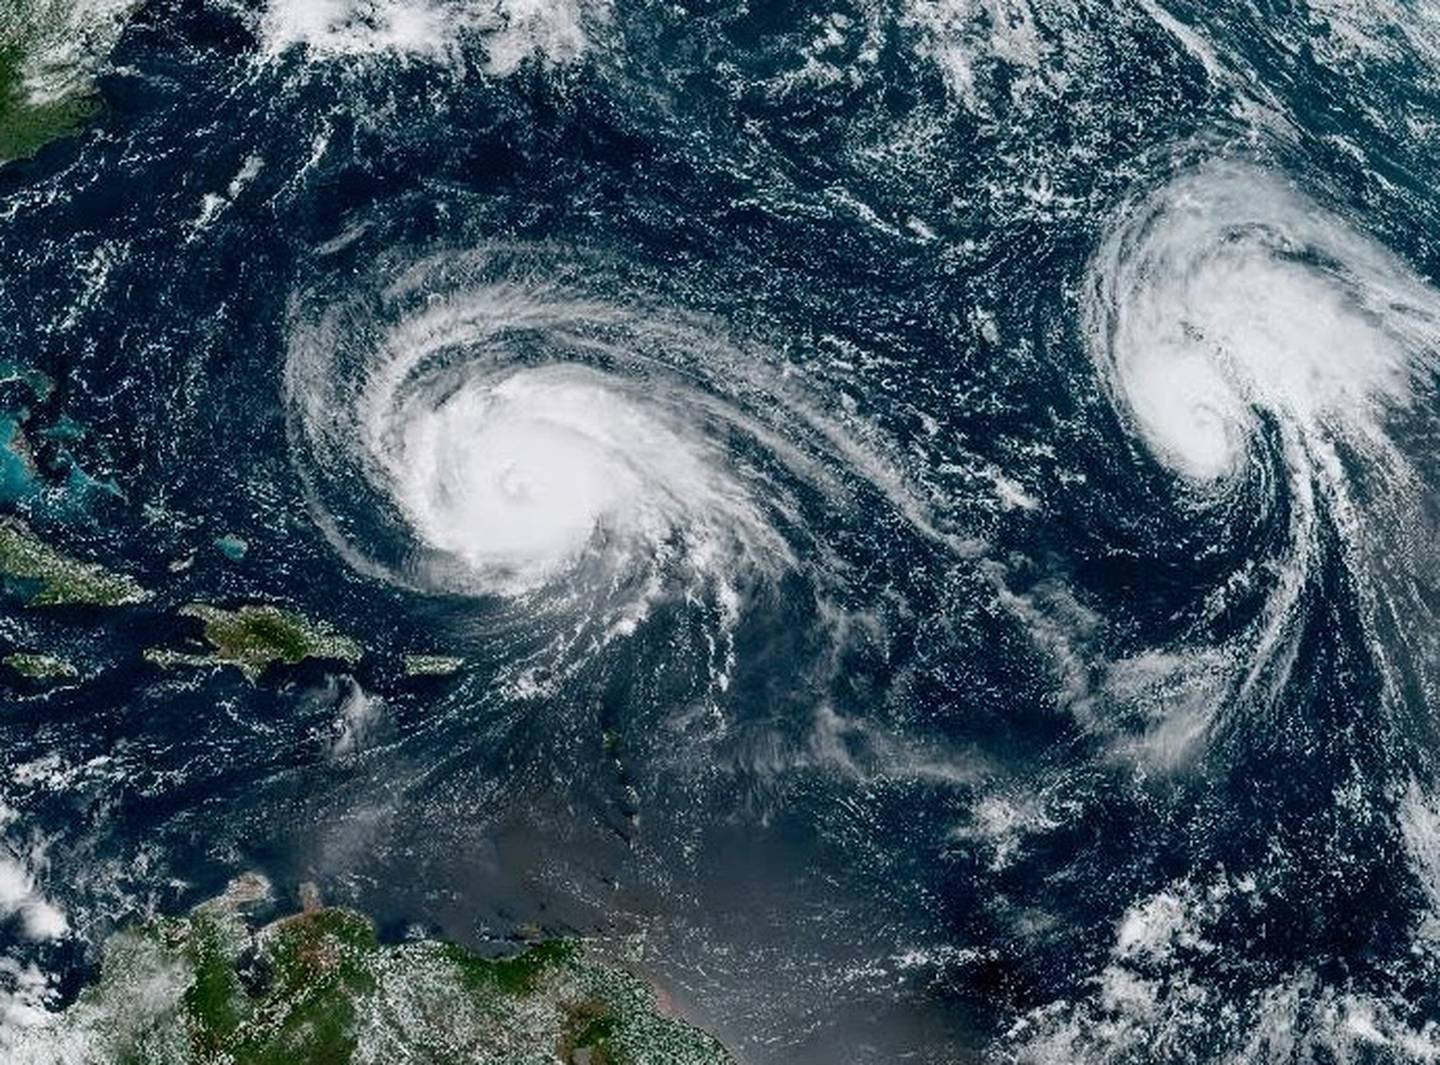 A NOAA satellite image released Monday shows Hurricane Lee churning in the Atlantic Ocean, with tropical storm Margot to its west. The Chesapeake Bay is in the upper northeast corner of the image.